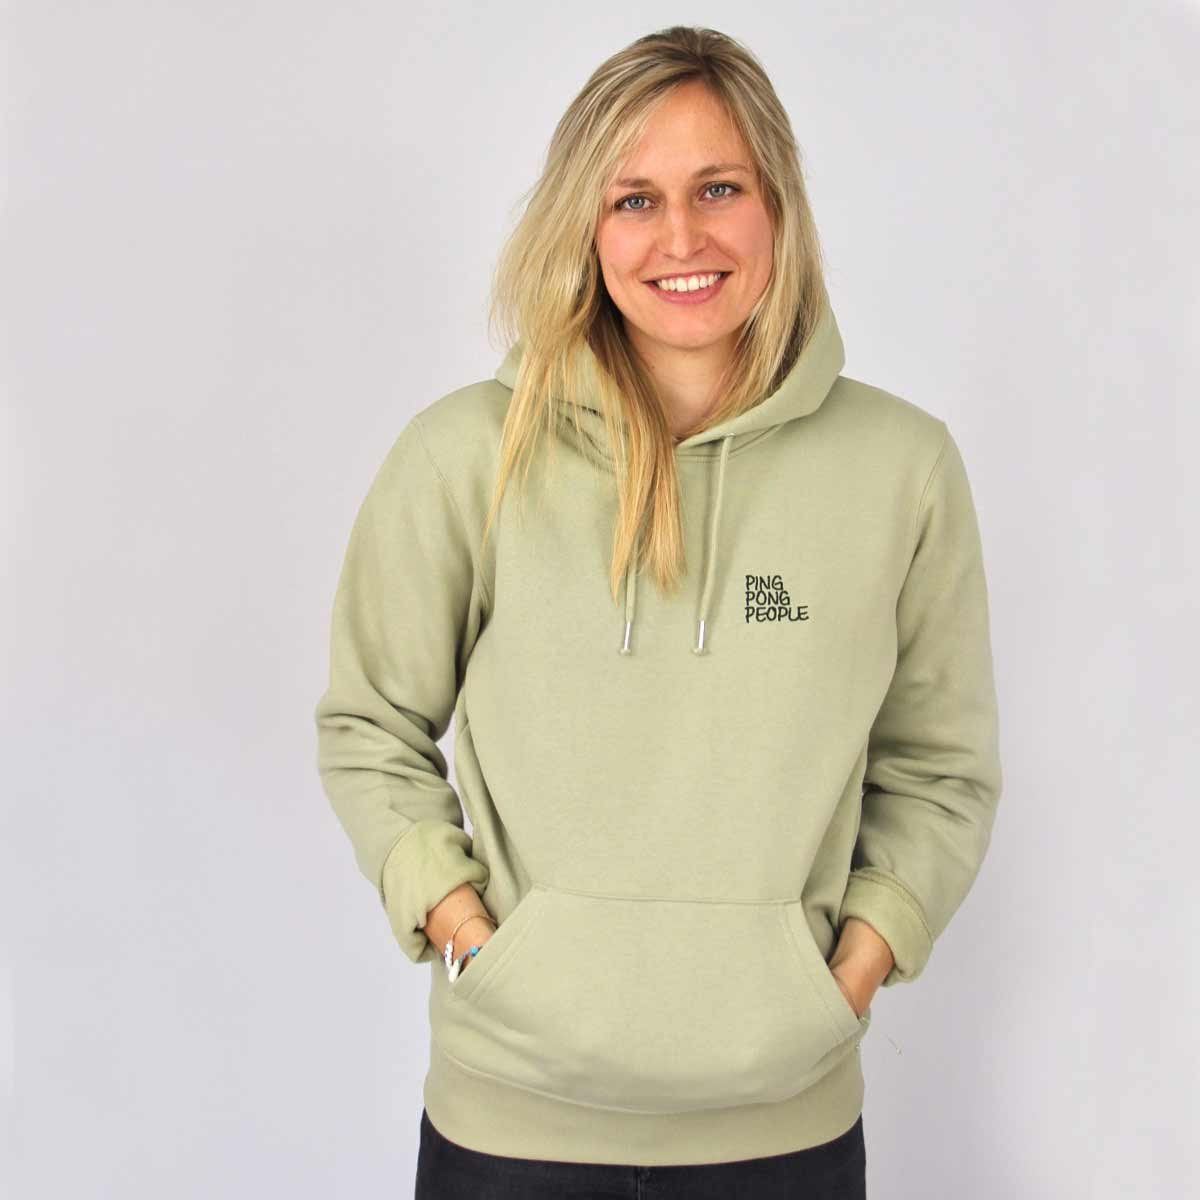 Table Tennis Clothing: Ping Pong People Unisex Sage Green Hoody - Call Us  For Help And Advice On 0161 761 6608